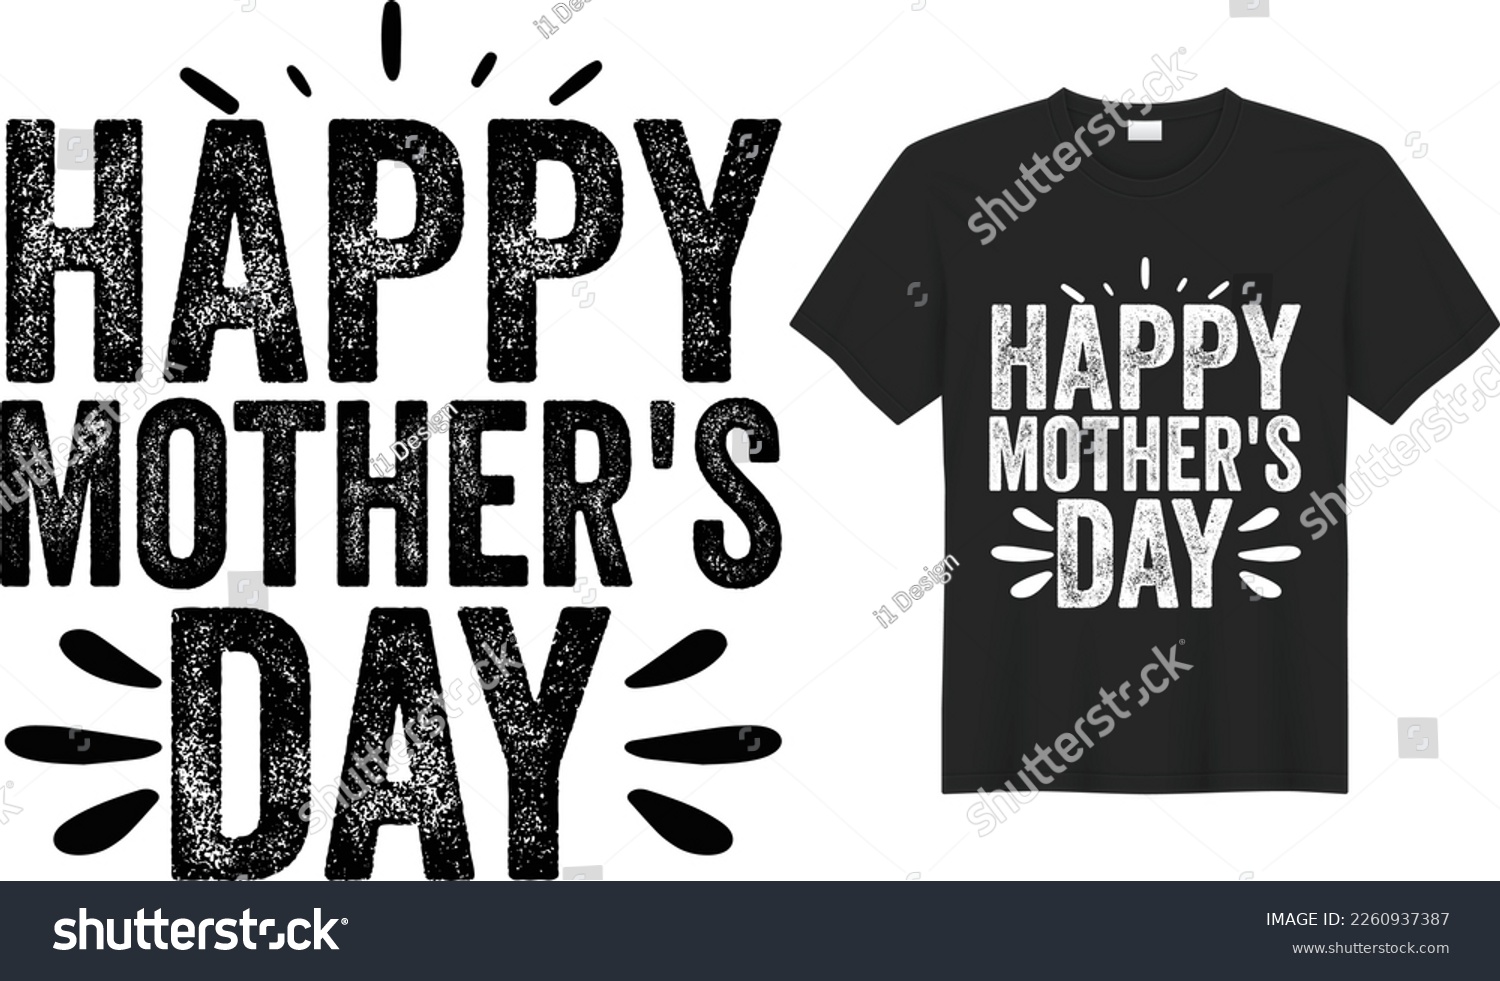 SVG of Happy mother's Day T-shirt and SVG Design Vector Template. Hand Lettering Illustration And Good for Greeting Cards, Pillow, T-shirt, Poster, Banners, Flyers, And POD. svg